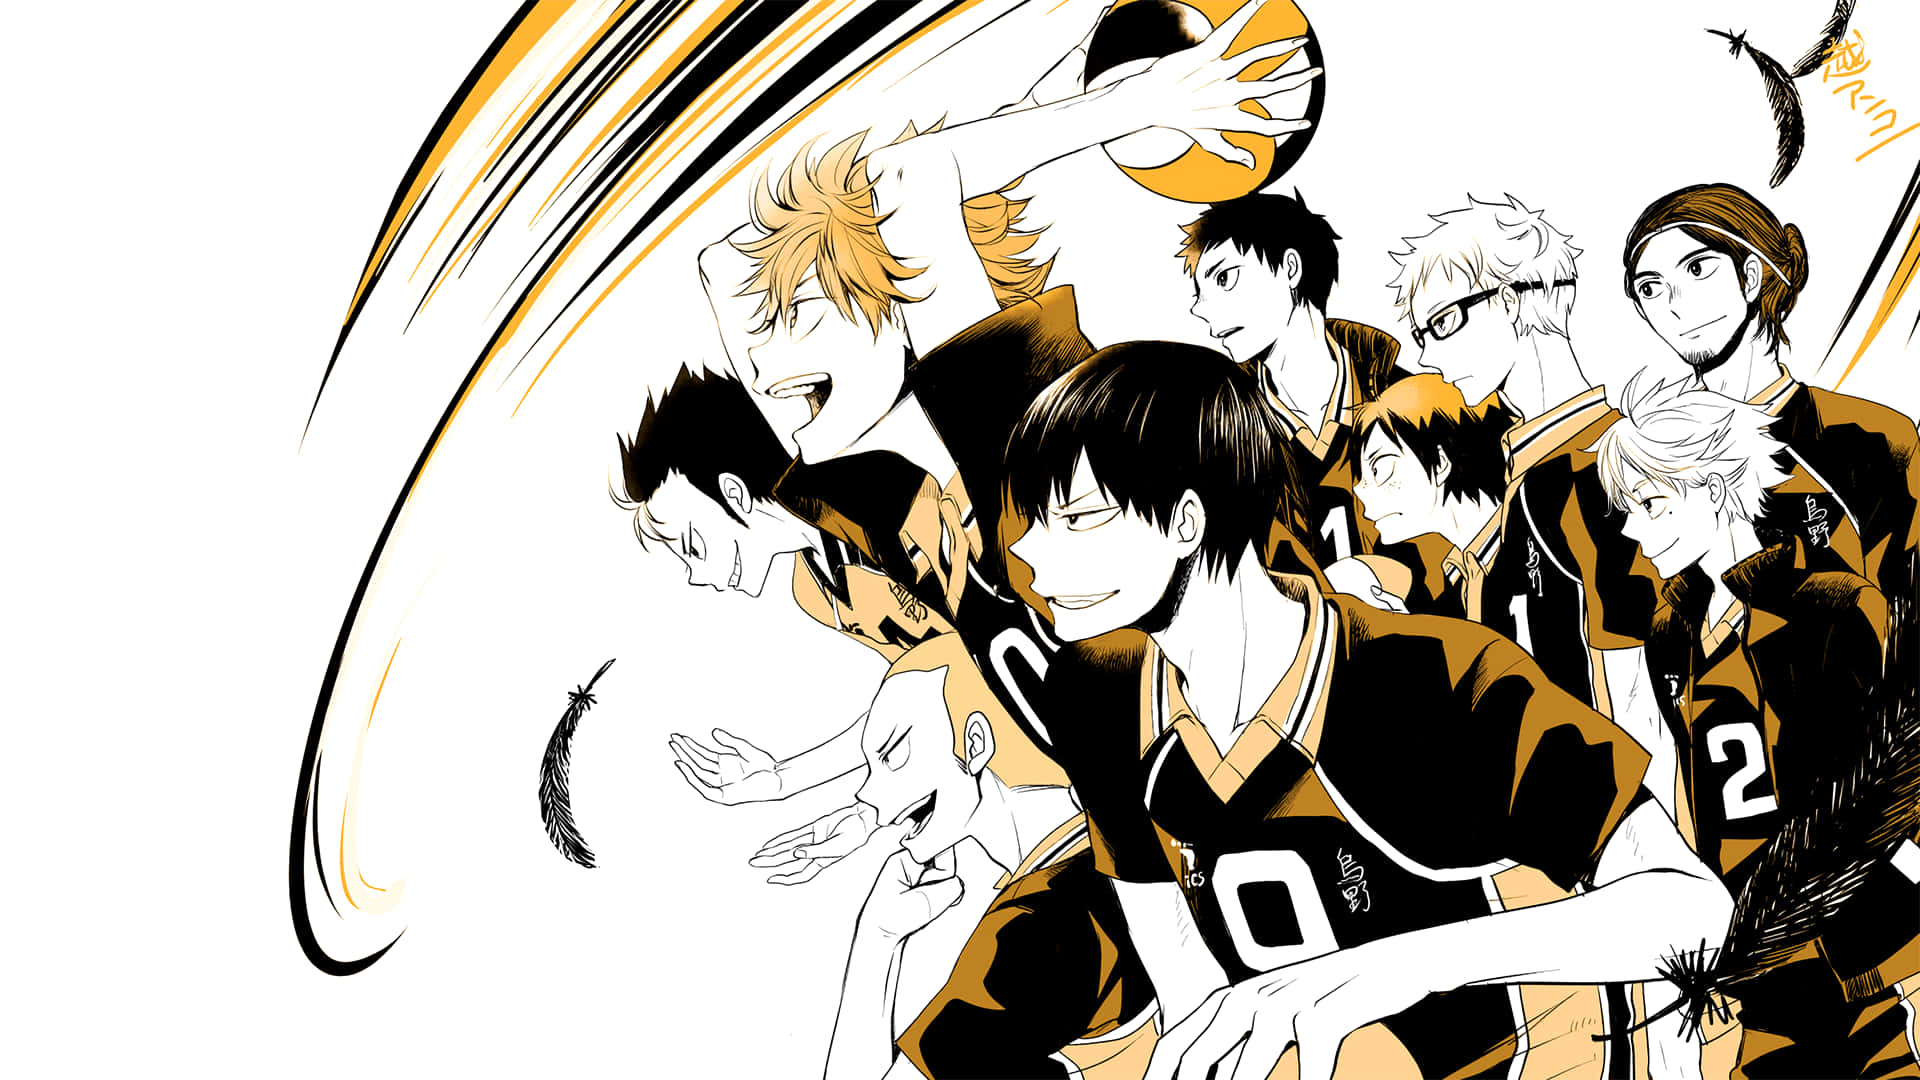 Dive into the world of Haikyuu Aesthetics with a beautiful Desktop background Wallpaper